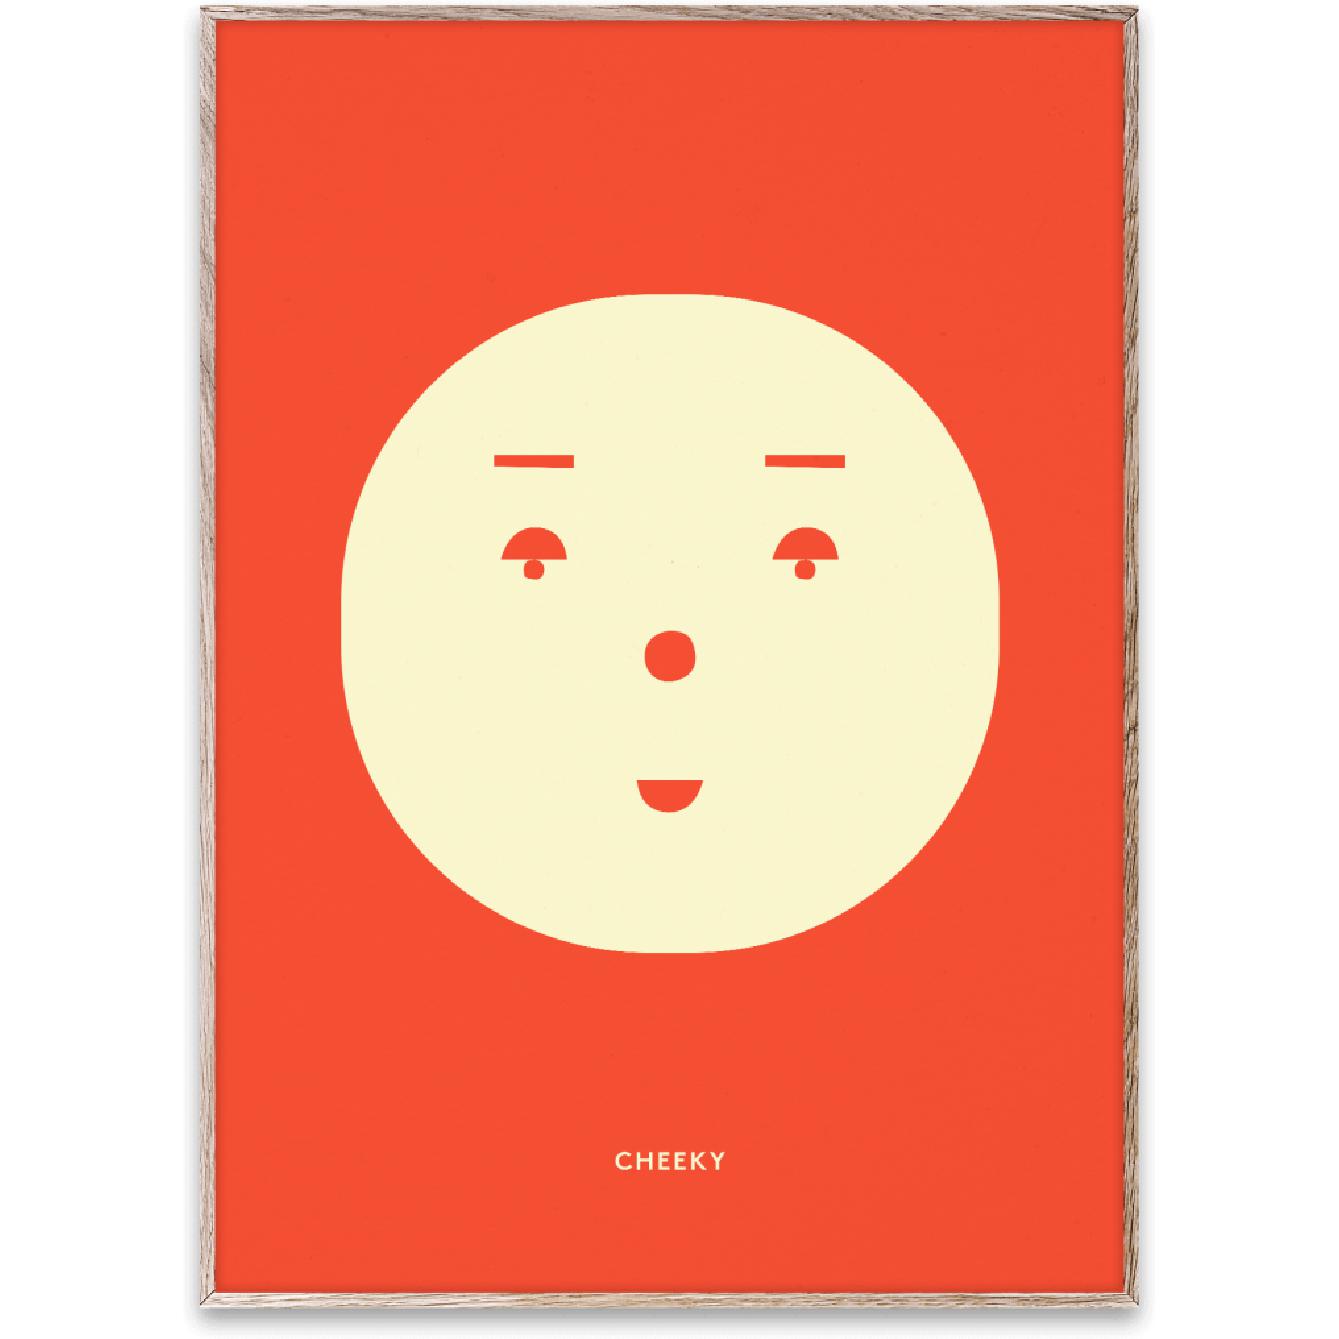 Paper Collective Cheeky Feeling Poster, 30x40 Cm